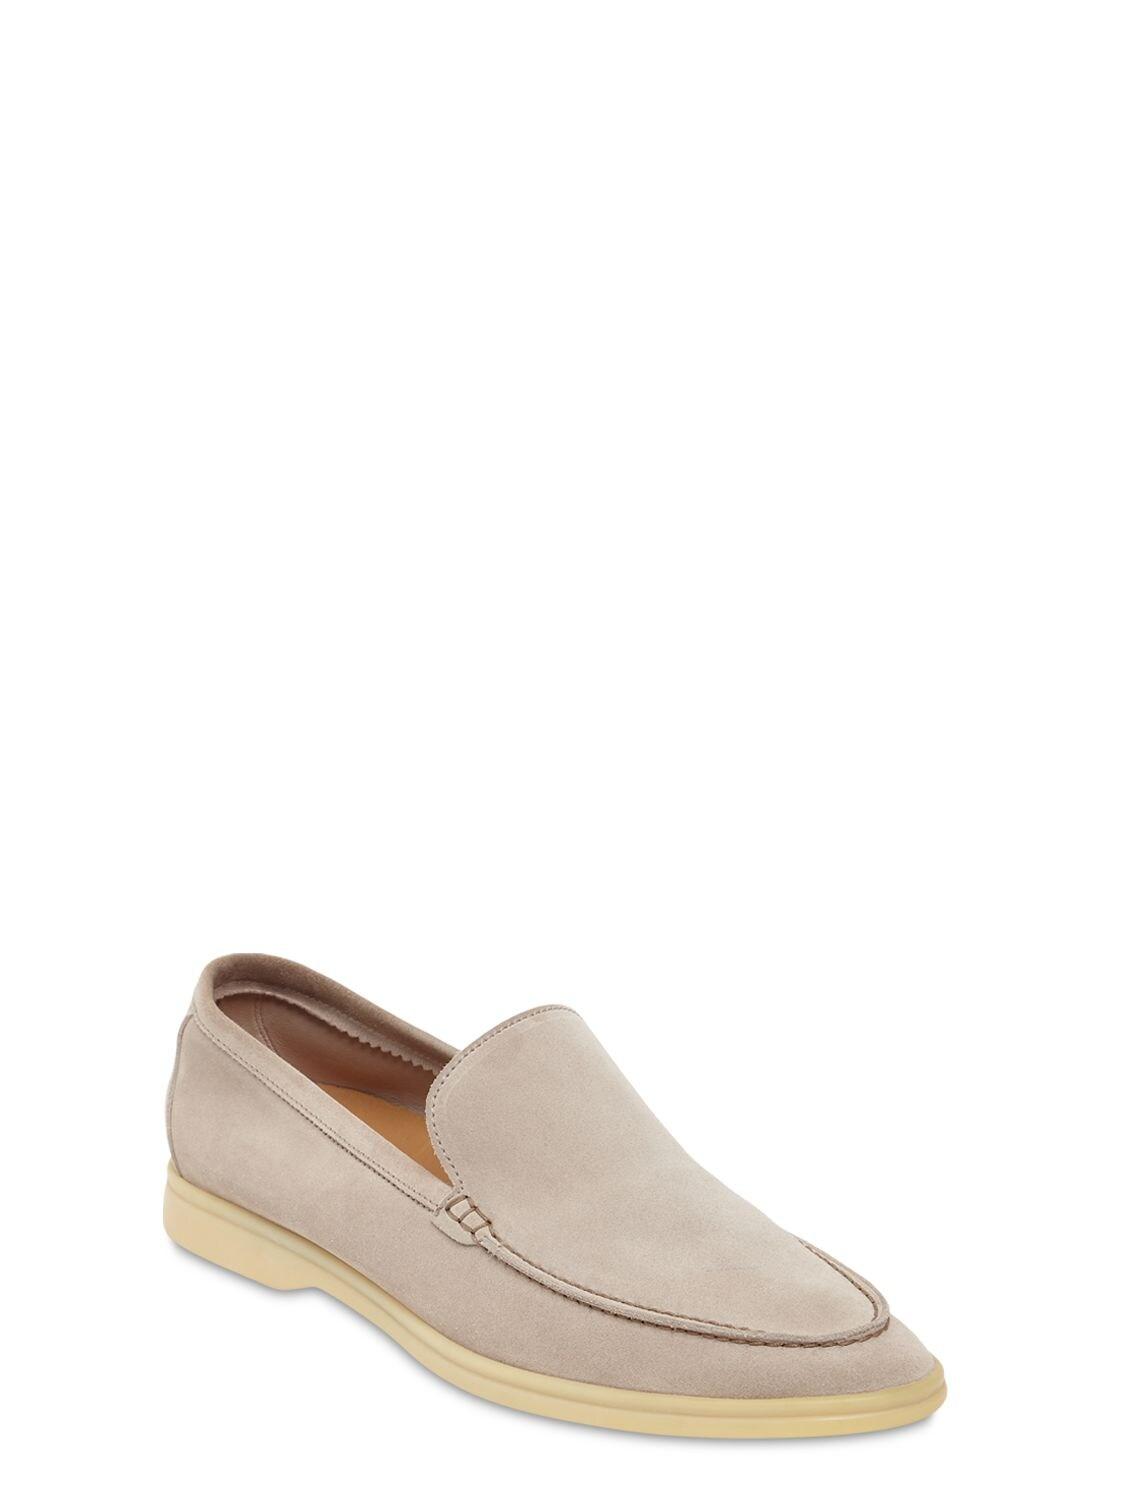 Loro Piana Summer Walk Suede Loafers in Natural for Men - Lyst